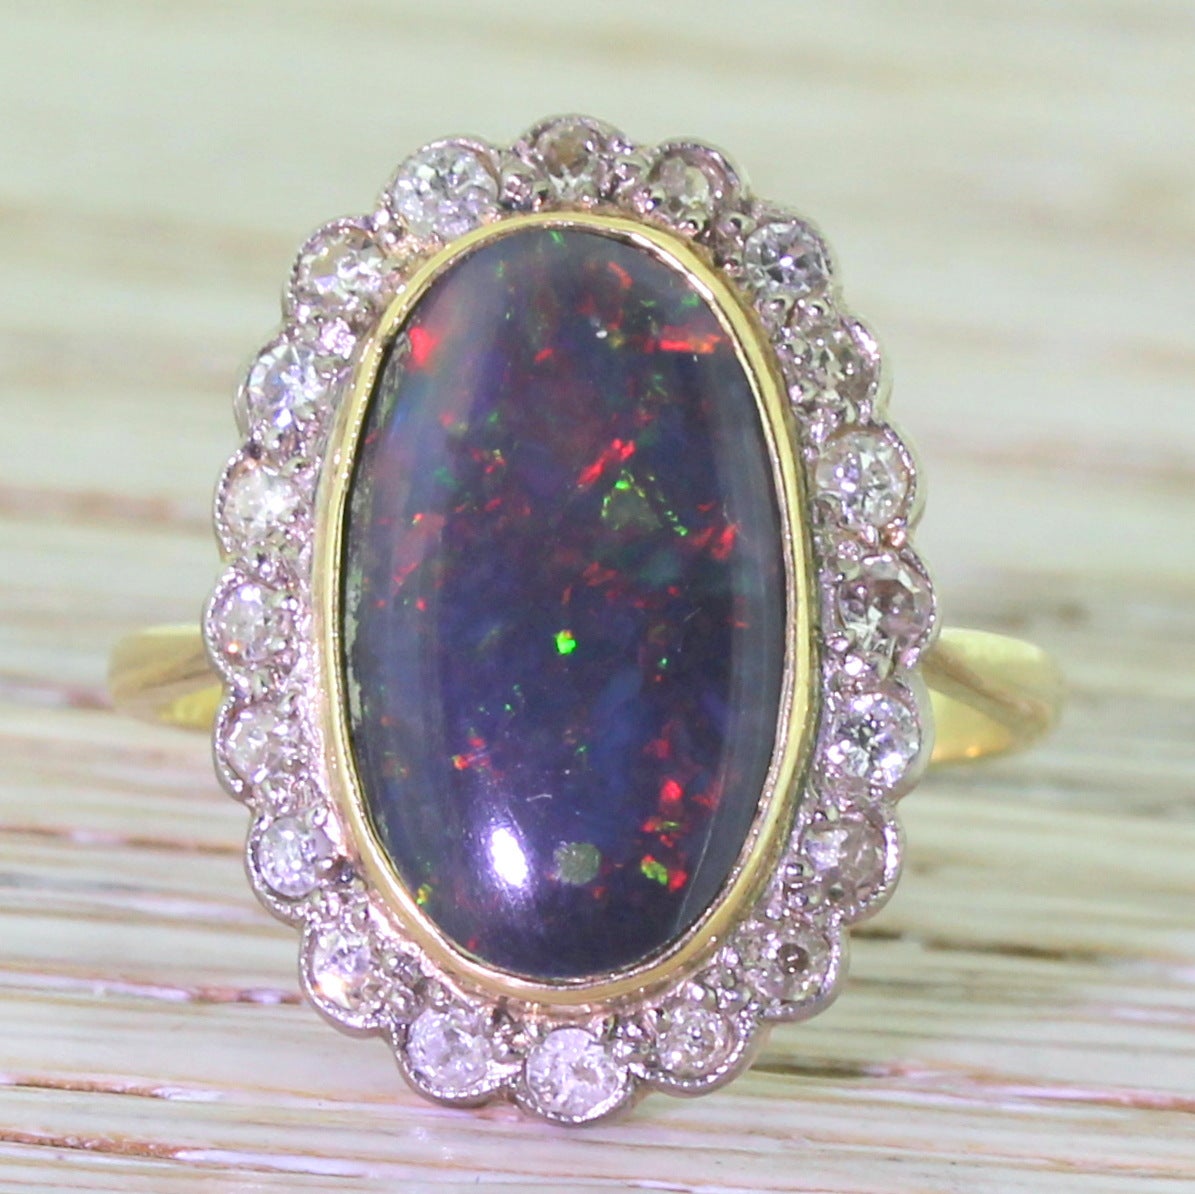 This wonderful and dramatic black opal show an impressive play of colours. Rubover set in yellow gold, the opal is surrounded by 20 old cut diamonds in platinum. The beautiful pierced gallery leads to a simple D-shaped yellow gold band. Sits nice